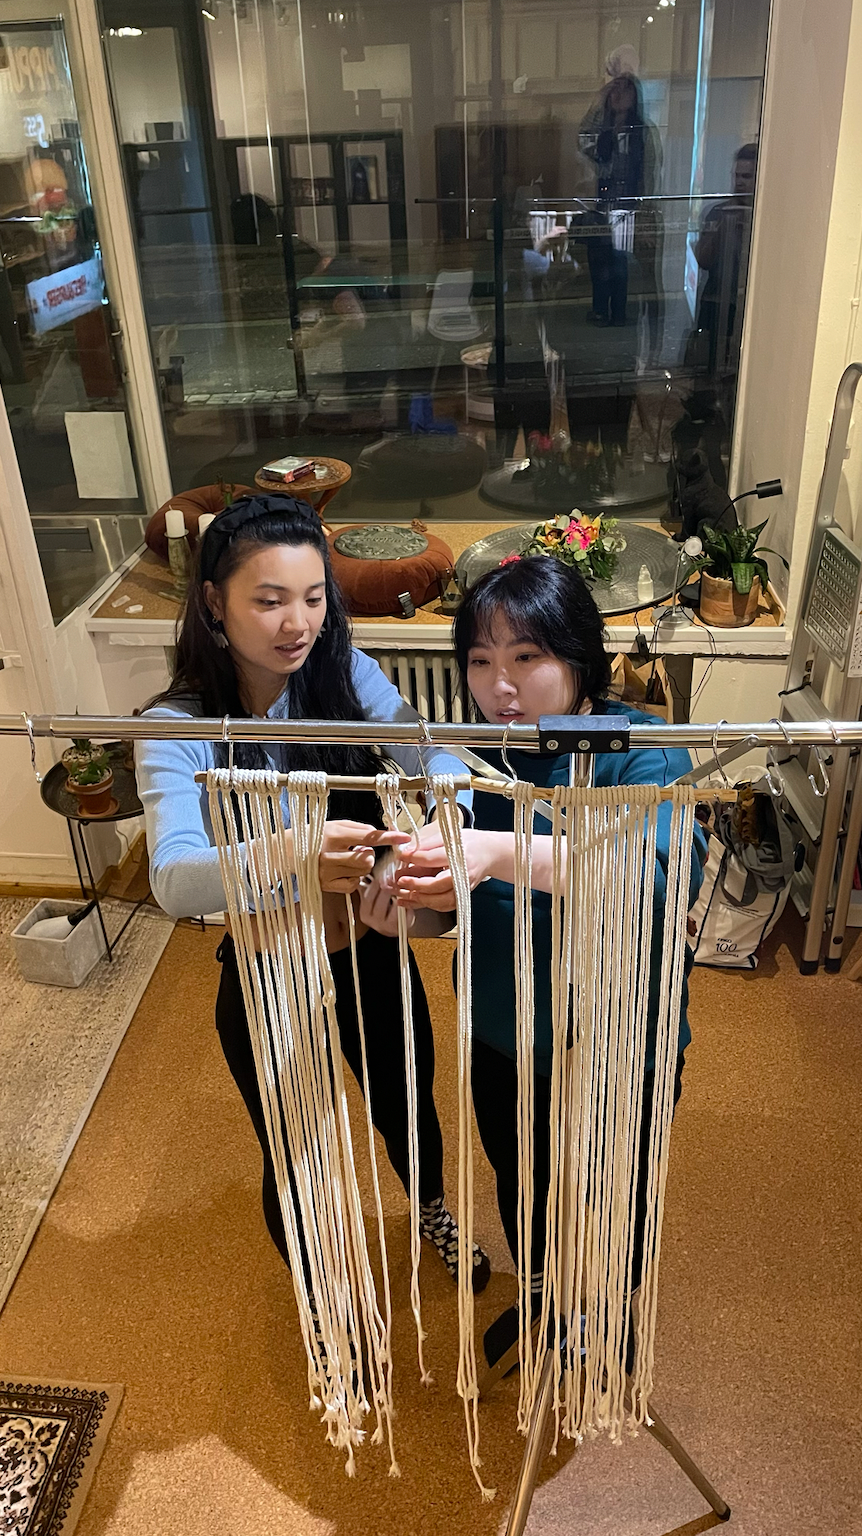 Macramé, Intuitive Dance, and Meditation Workshop "The Artful Self-Discovery" with Yangxuan in Helsinki, Finland by subcultours